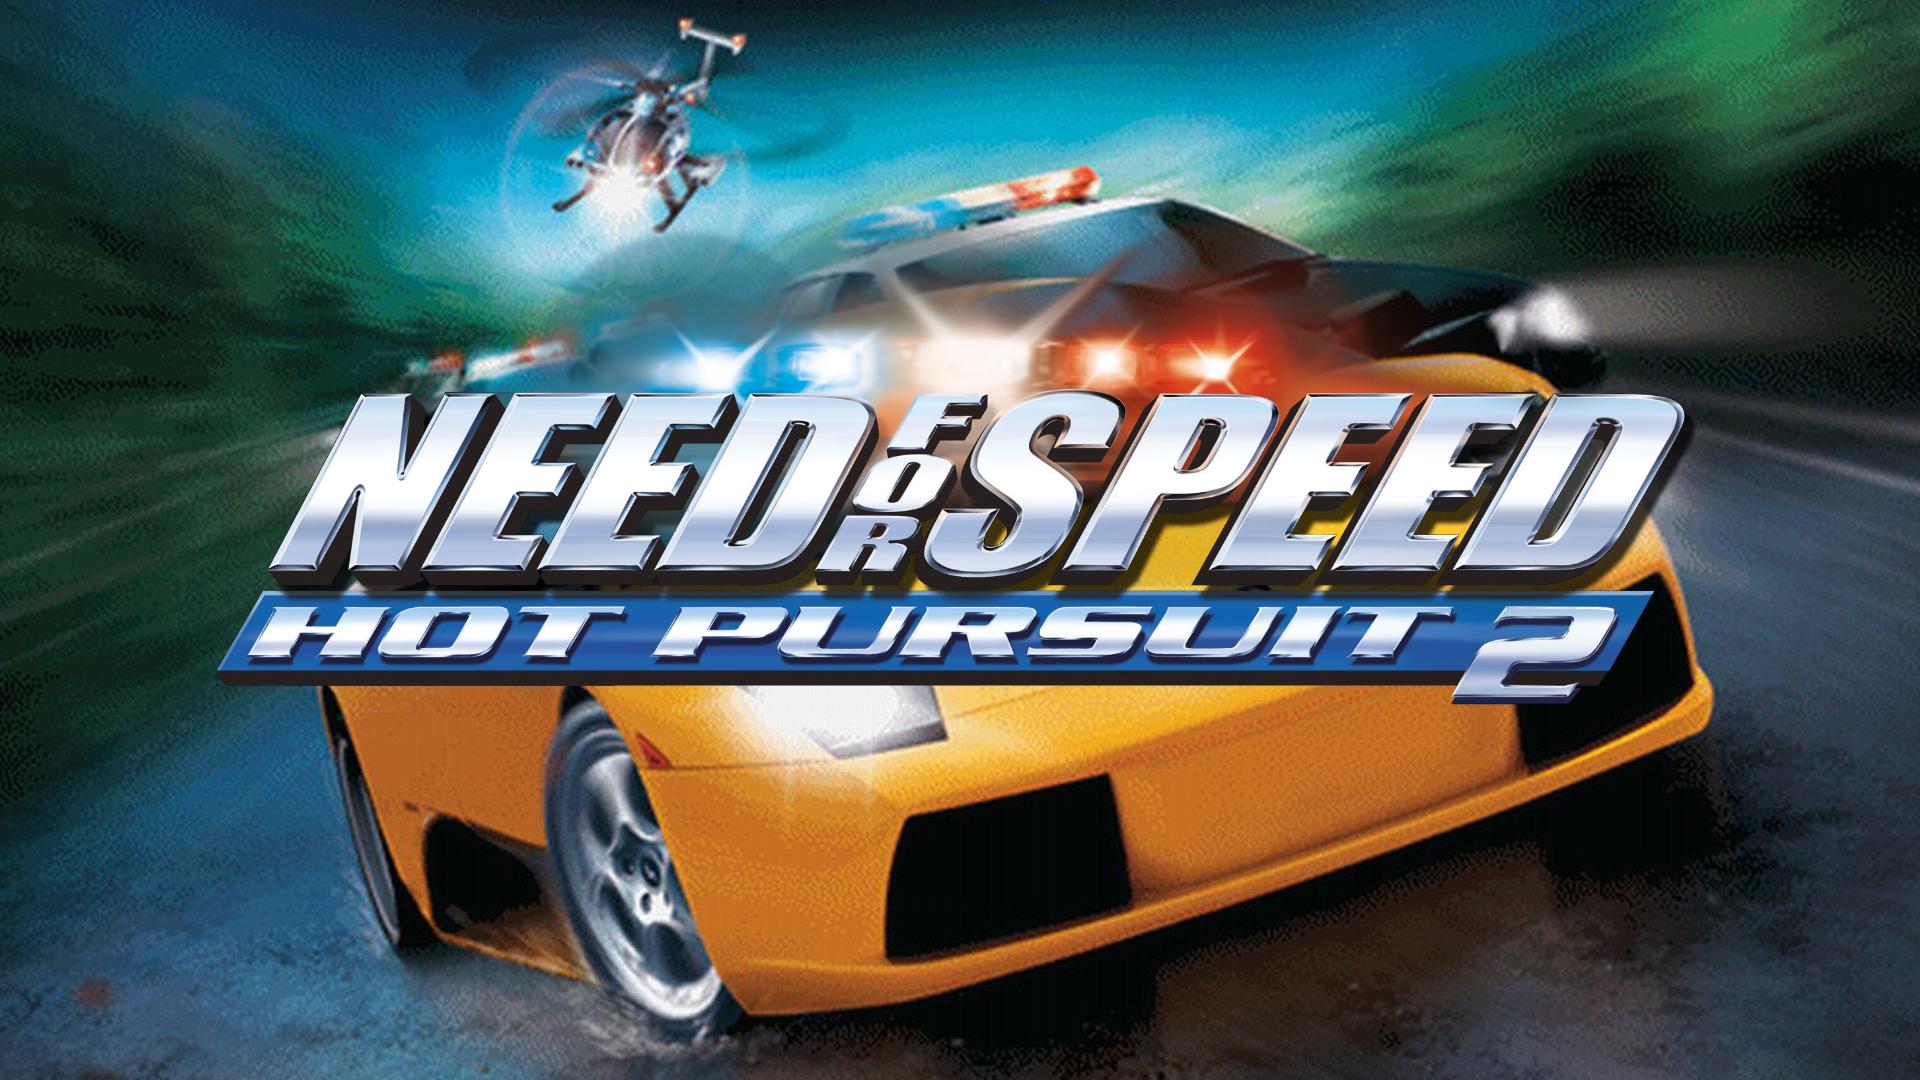 The iconic Need for Speed Hot Pursuit 2 cover art